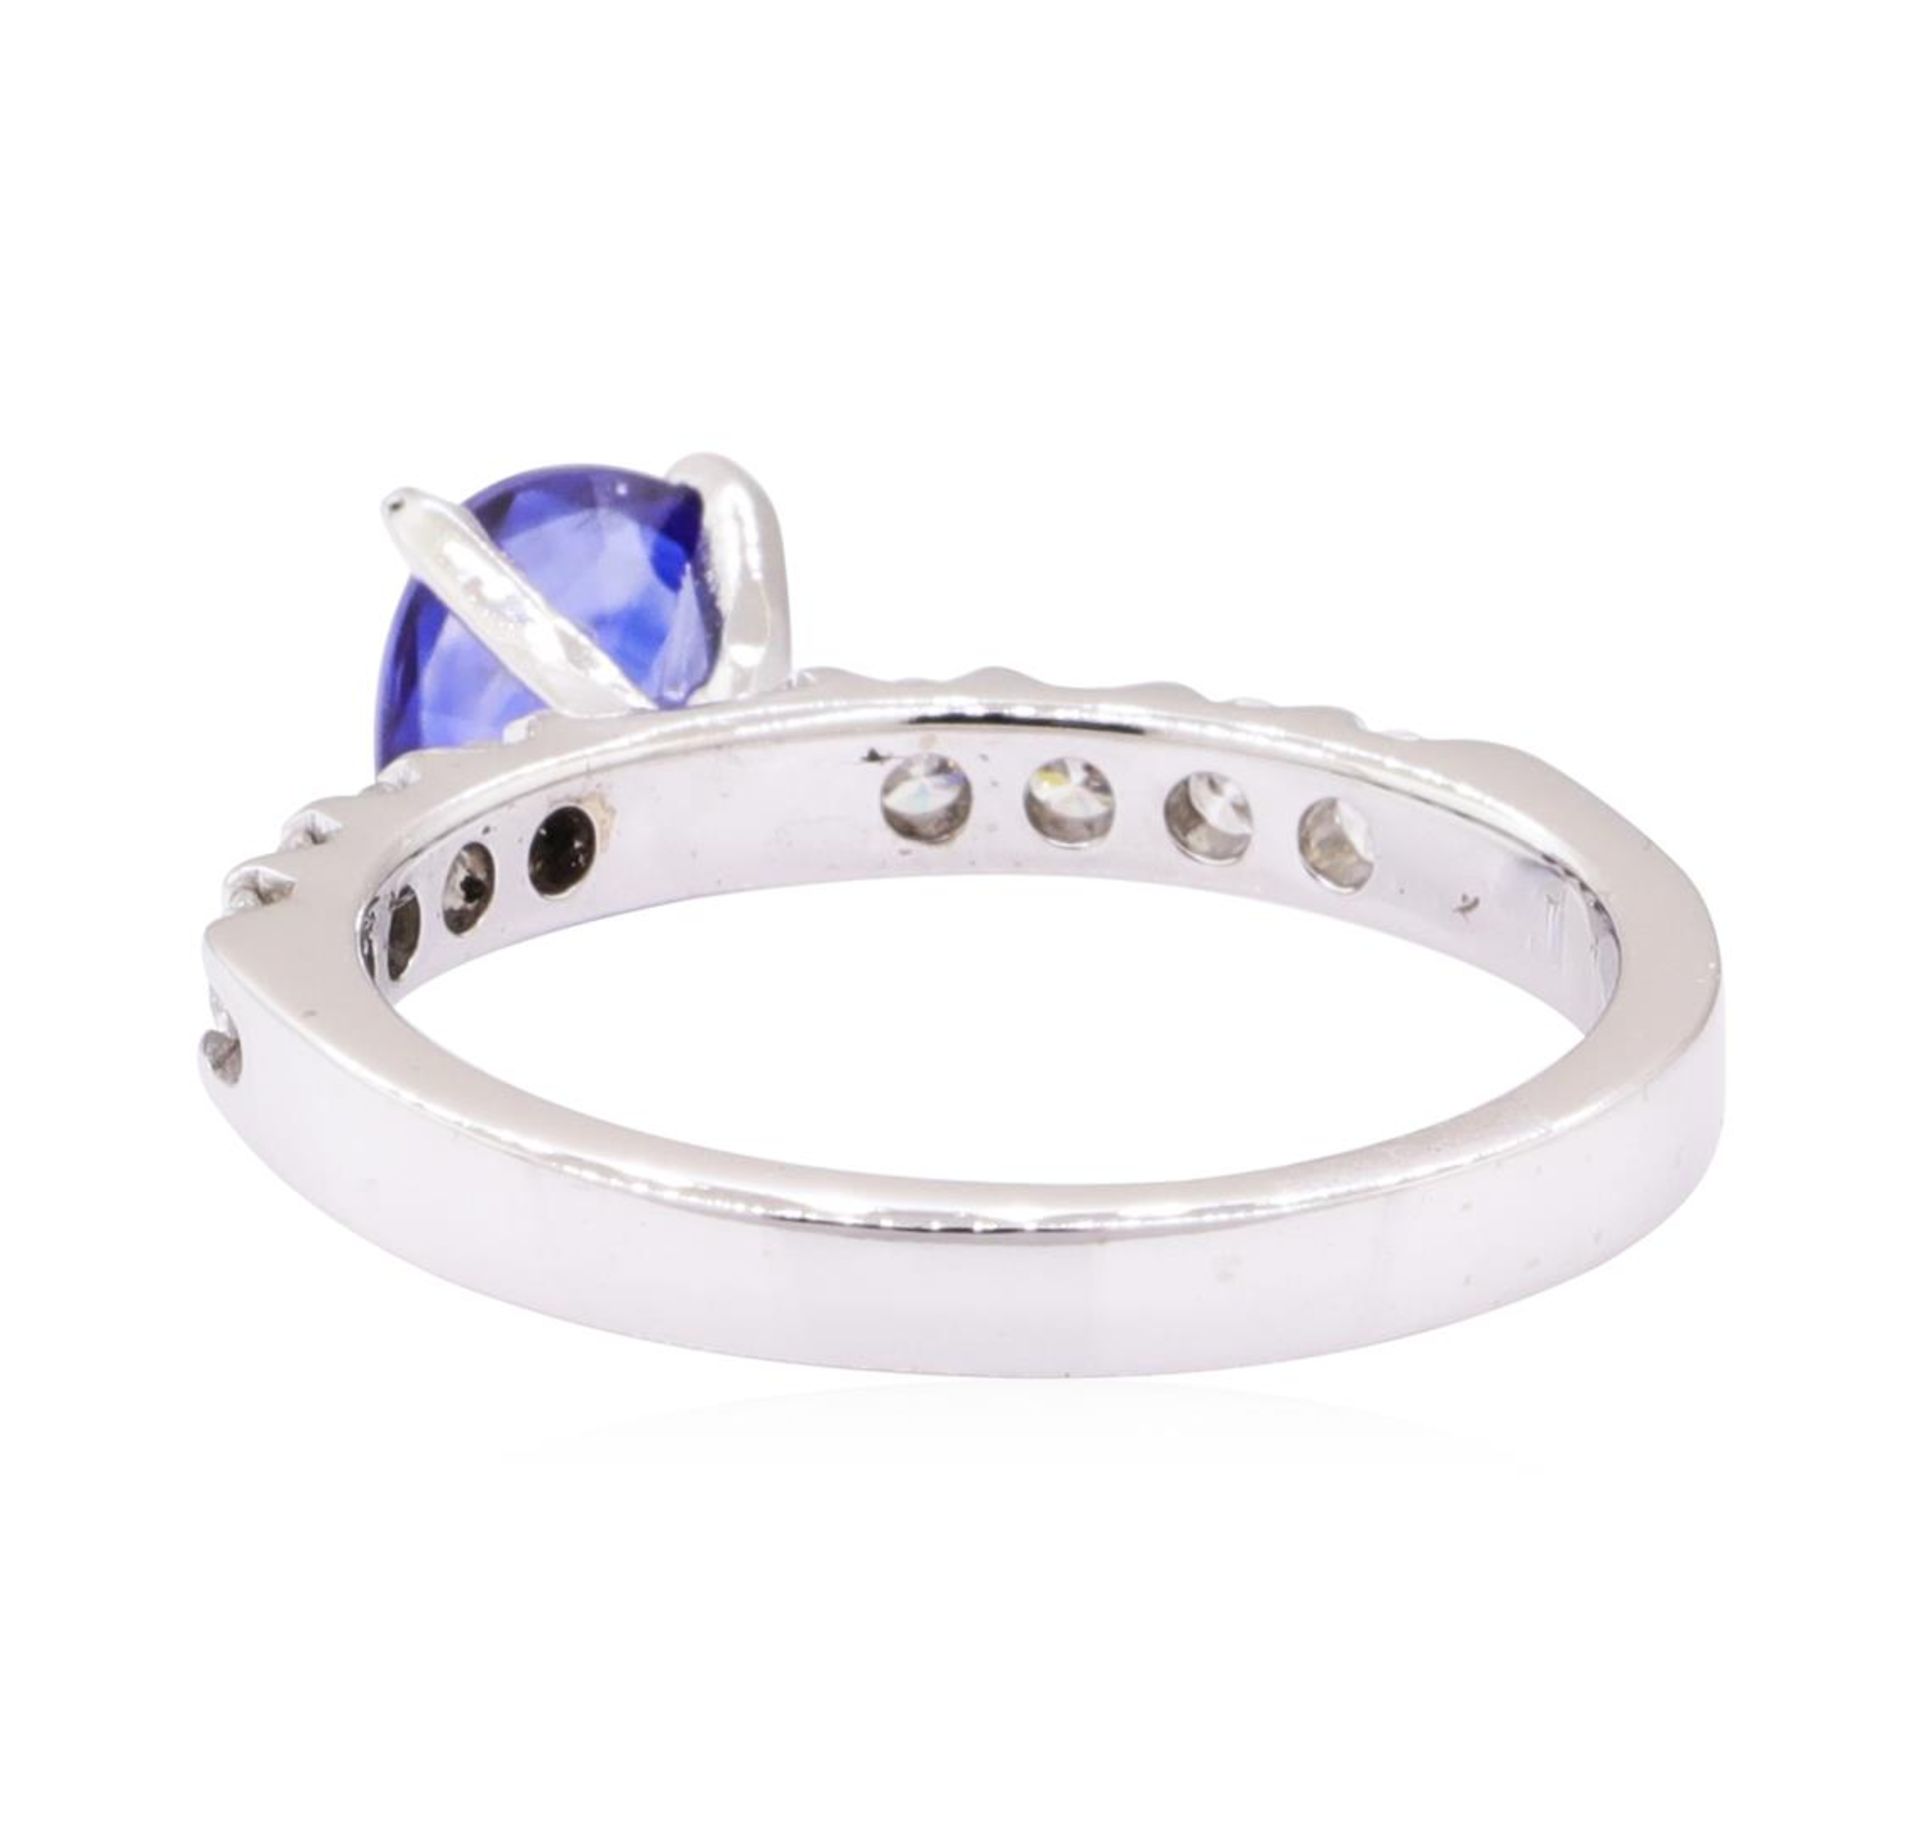 1.11ctw Blue Sapphire and Diamond Ring - 14KT White Gold - Image 3 of 4